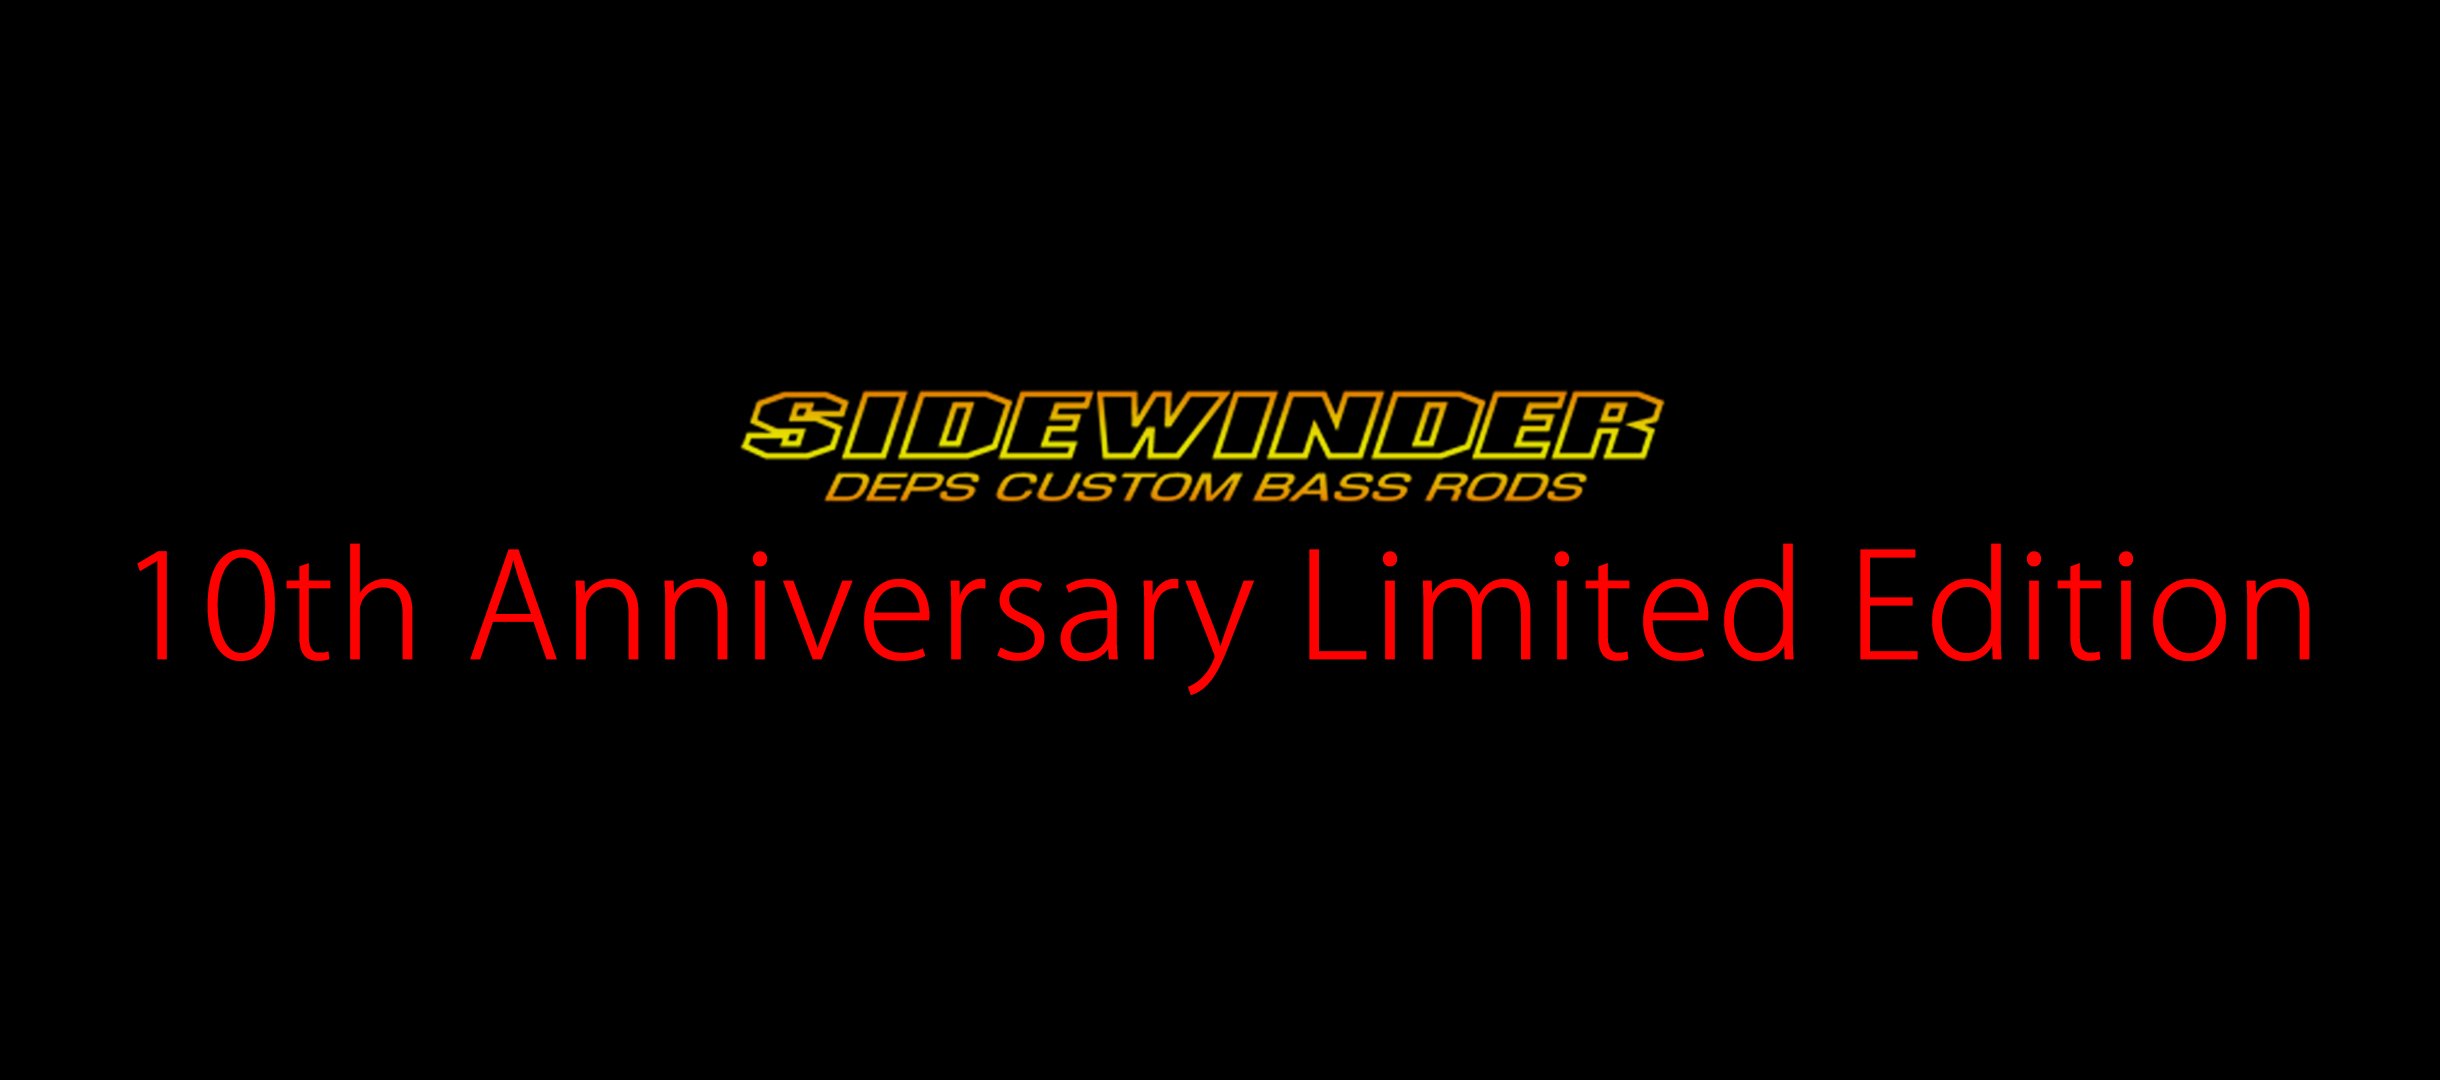 SIDEWINDER 10th Anniversary Limited Edition | deps OFFICIAL HP